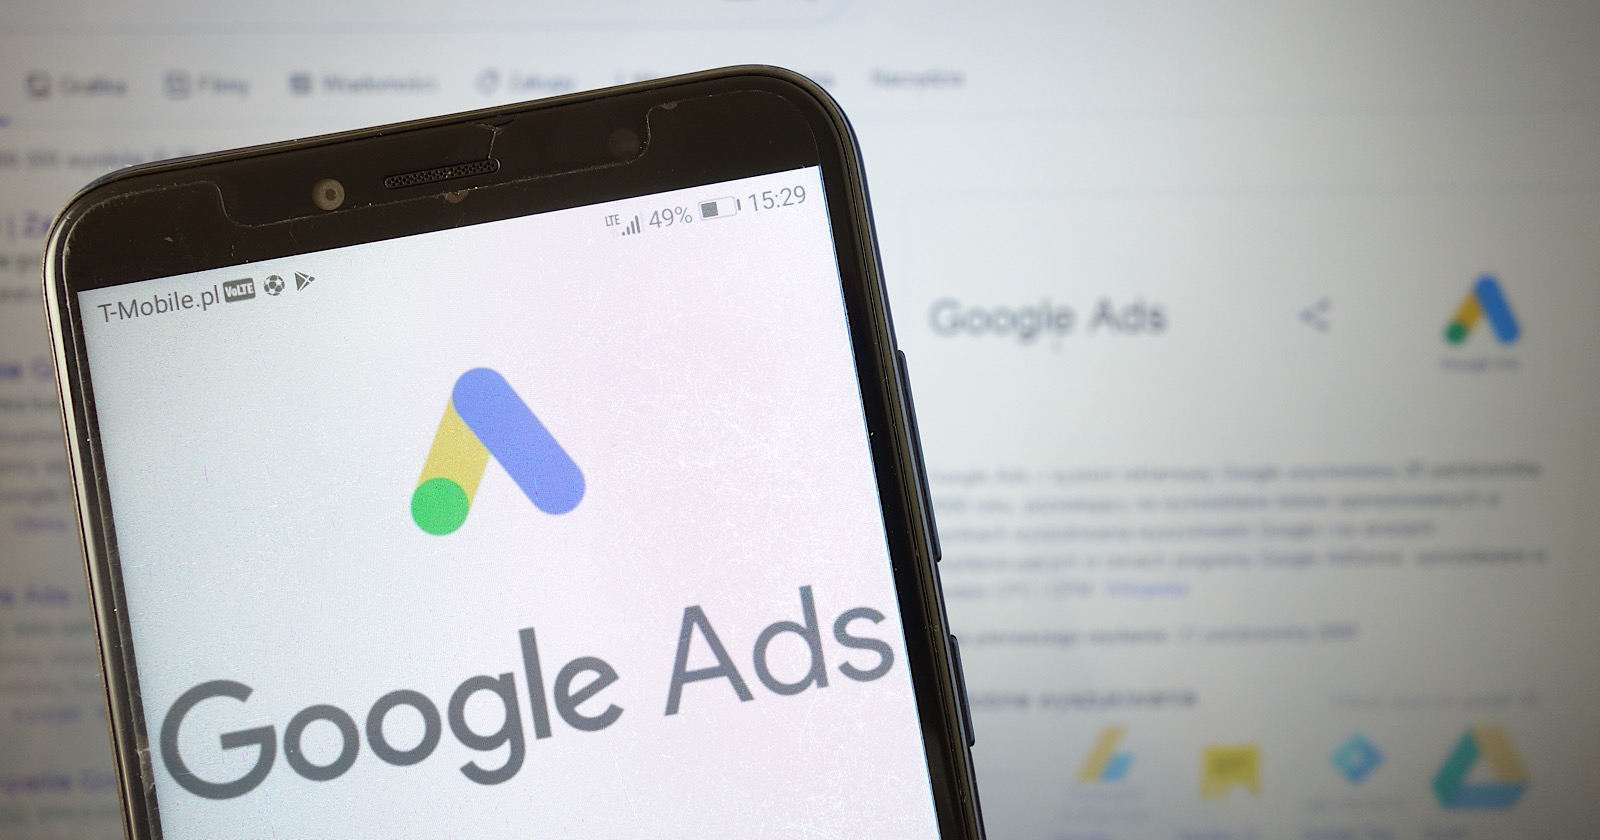 google ads rolls out 2 new tools for responsive search ads via mattgsouthern